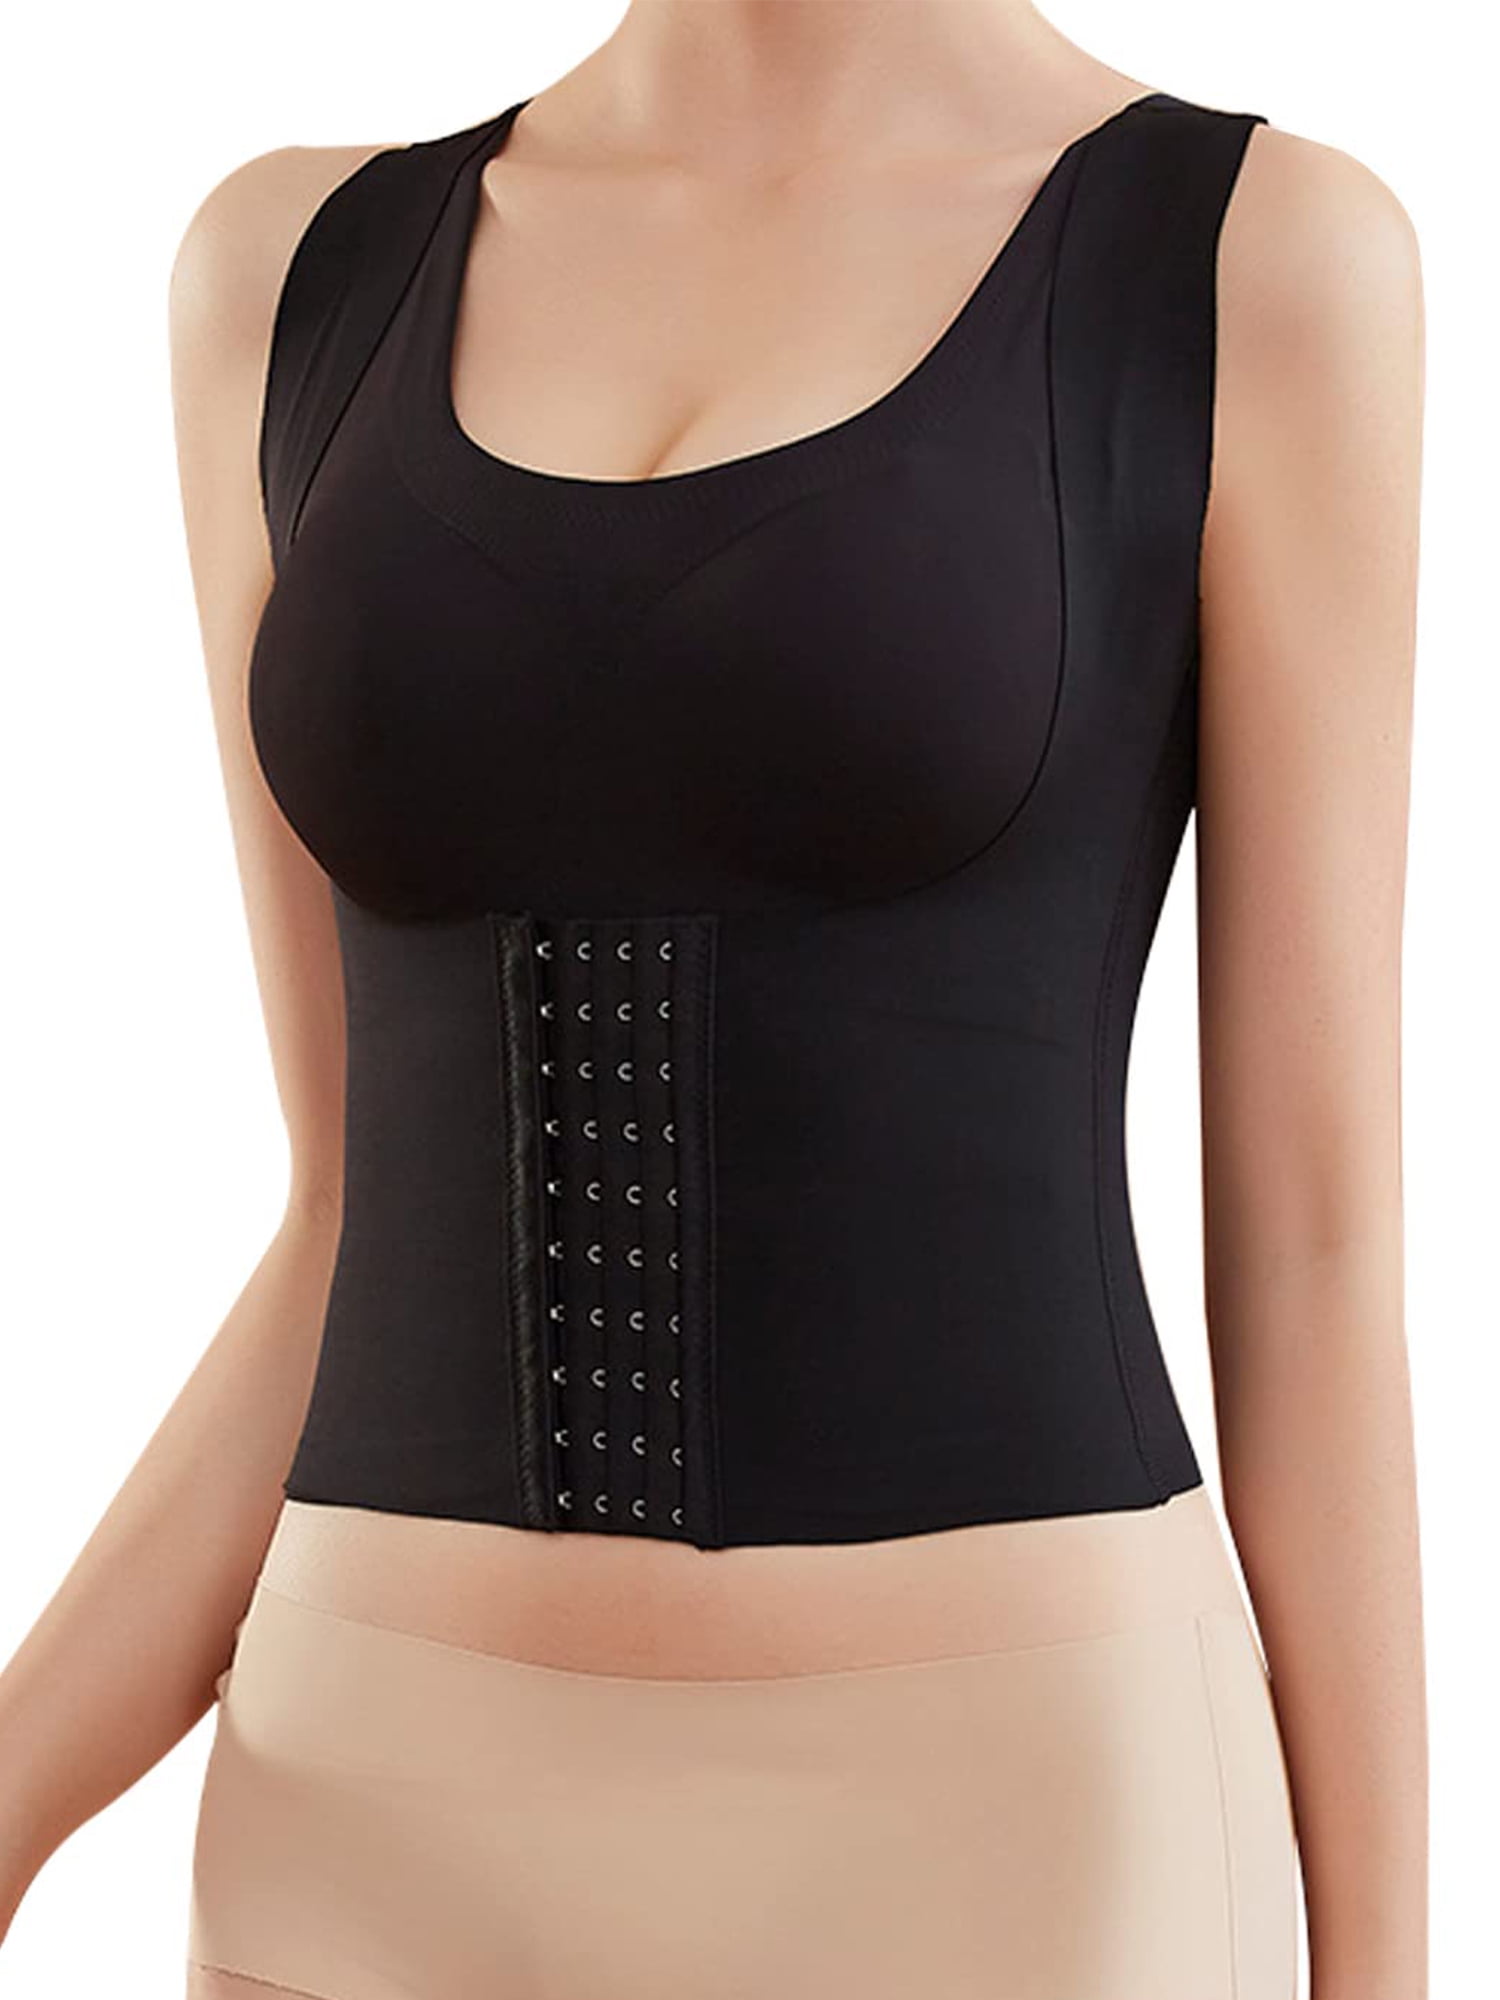 Black Corset Slimming Camisole Body Shaper Top For Tightening